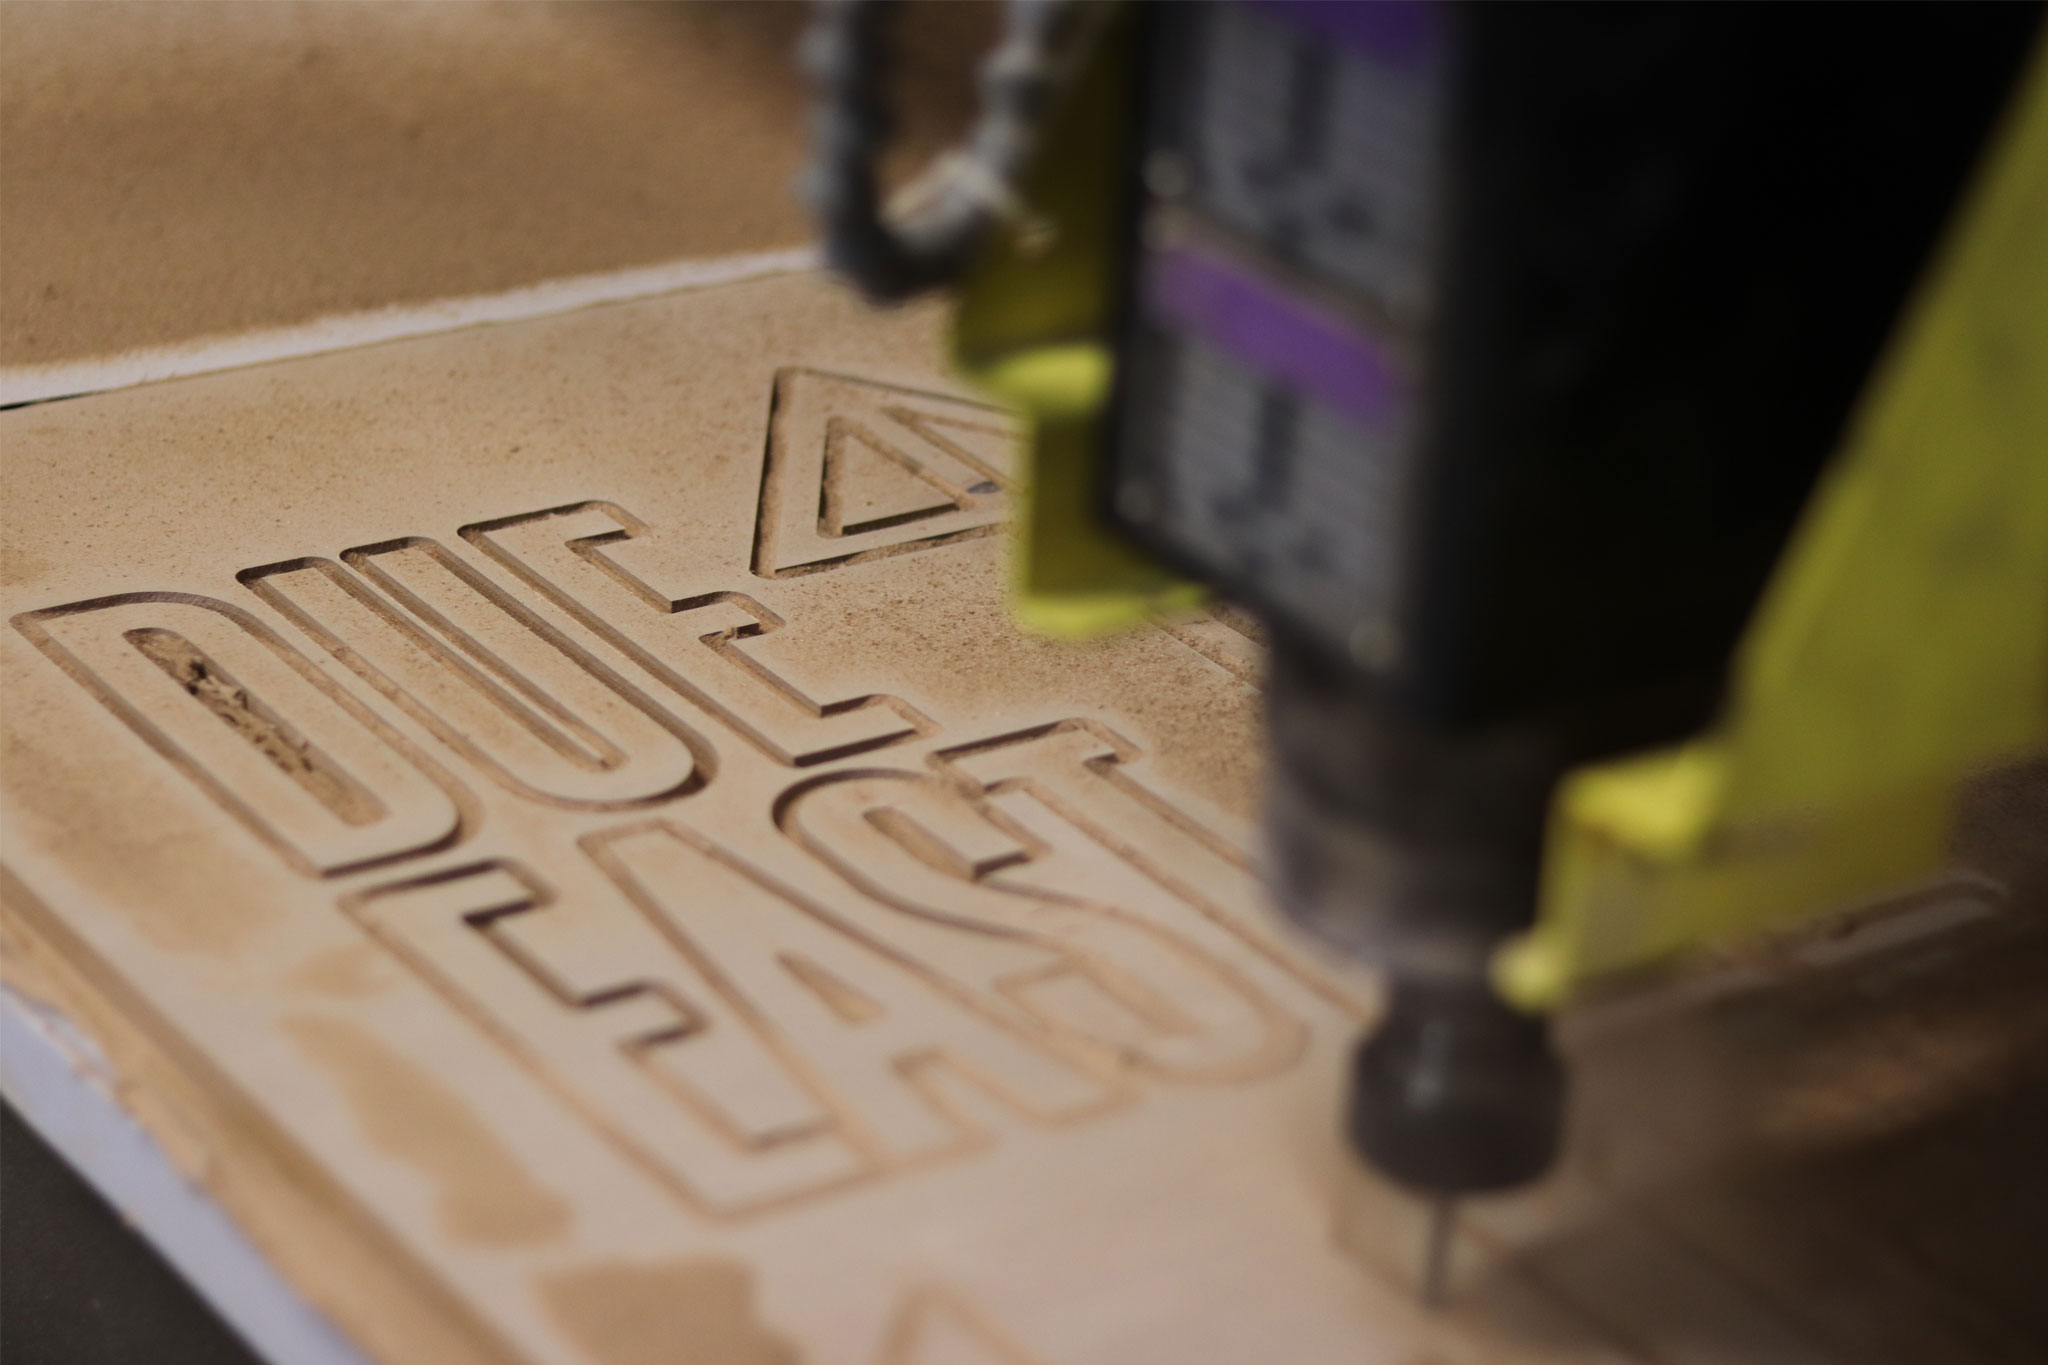 Picture of the CNC machine cutting out the lettering for the wood sign.